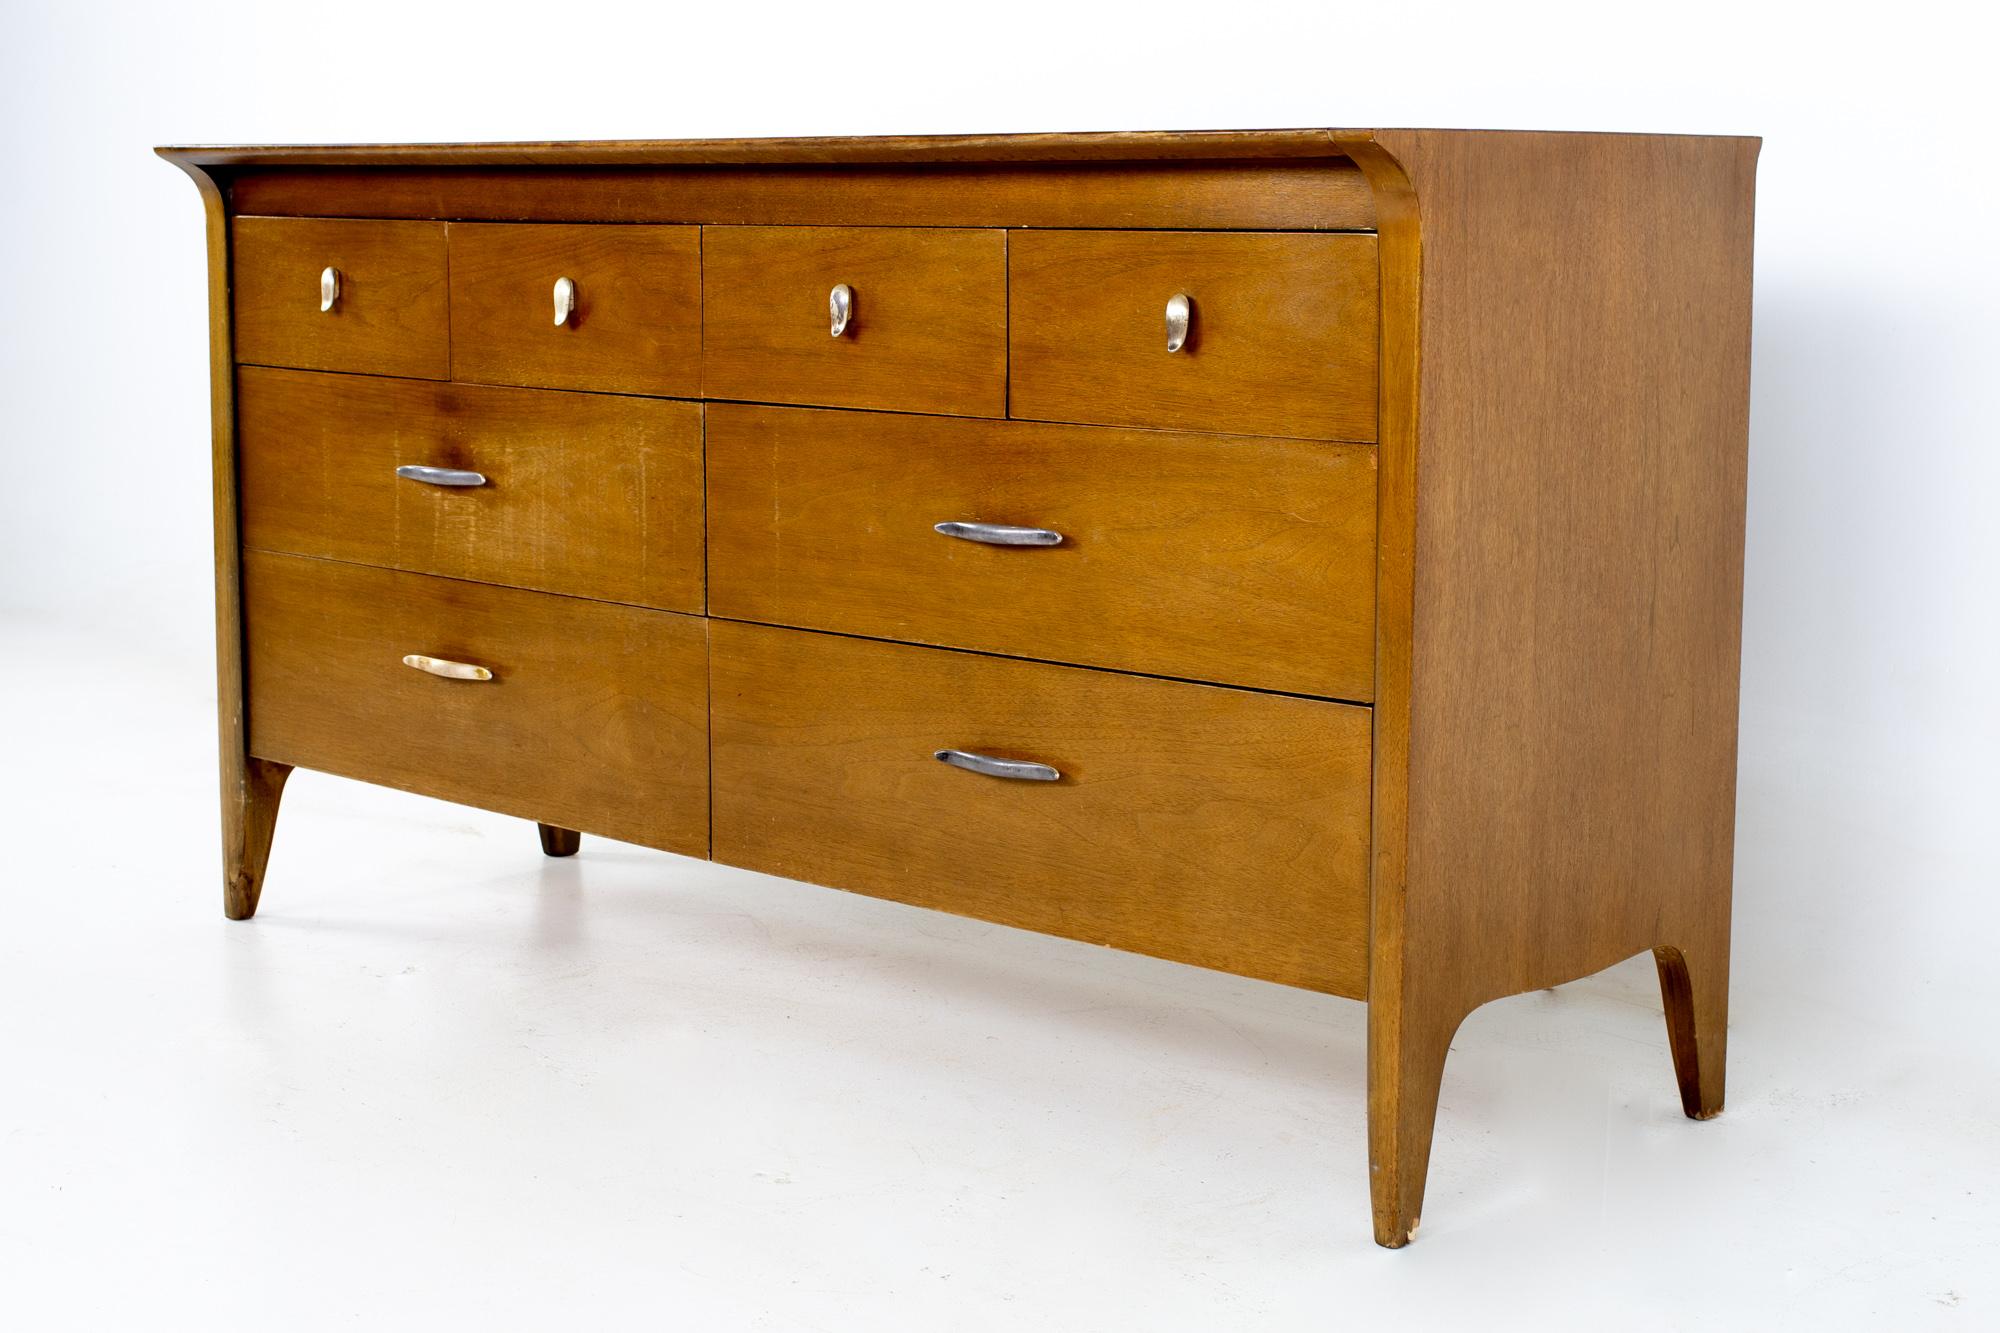 John Van Koert for Drexel mid century buffet credenza
Credenza measures: 60 wide x 21 deep x 32 inches high

All pieces of furniture can be had in what we call restored vintage condition. That means the piece is restored upon purchase so it’s